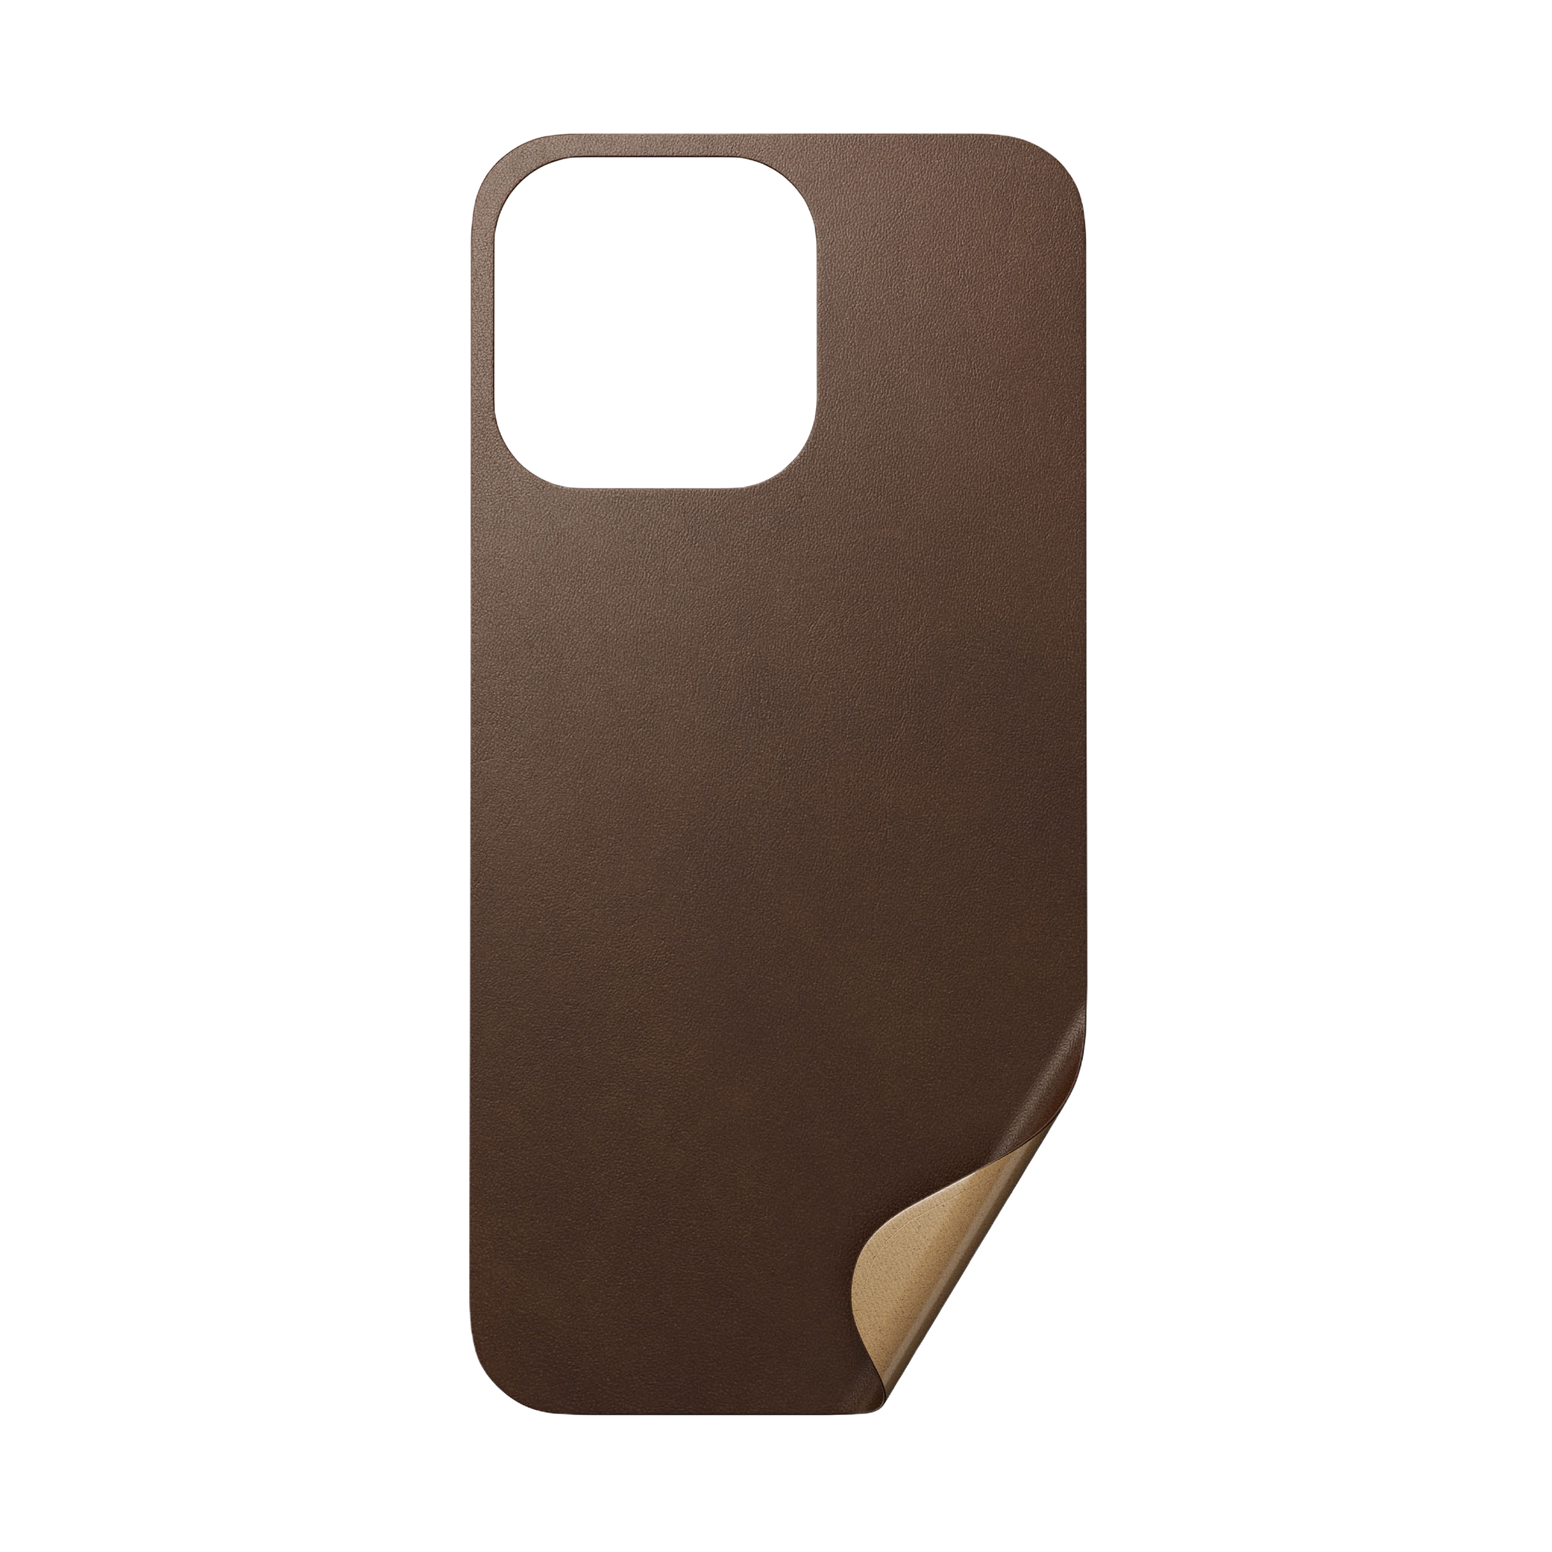 Nomad Skin with Horween Leather for iPhone 13 Pro - Rustic Brown - Discontinued